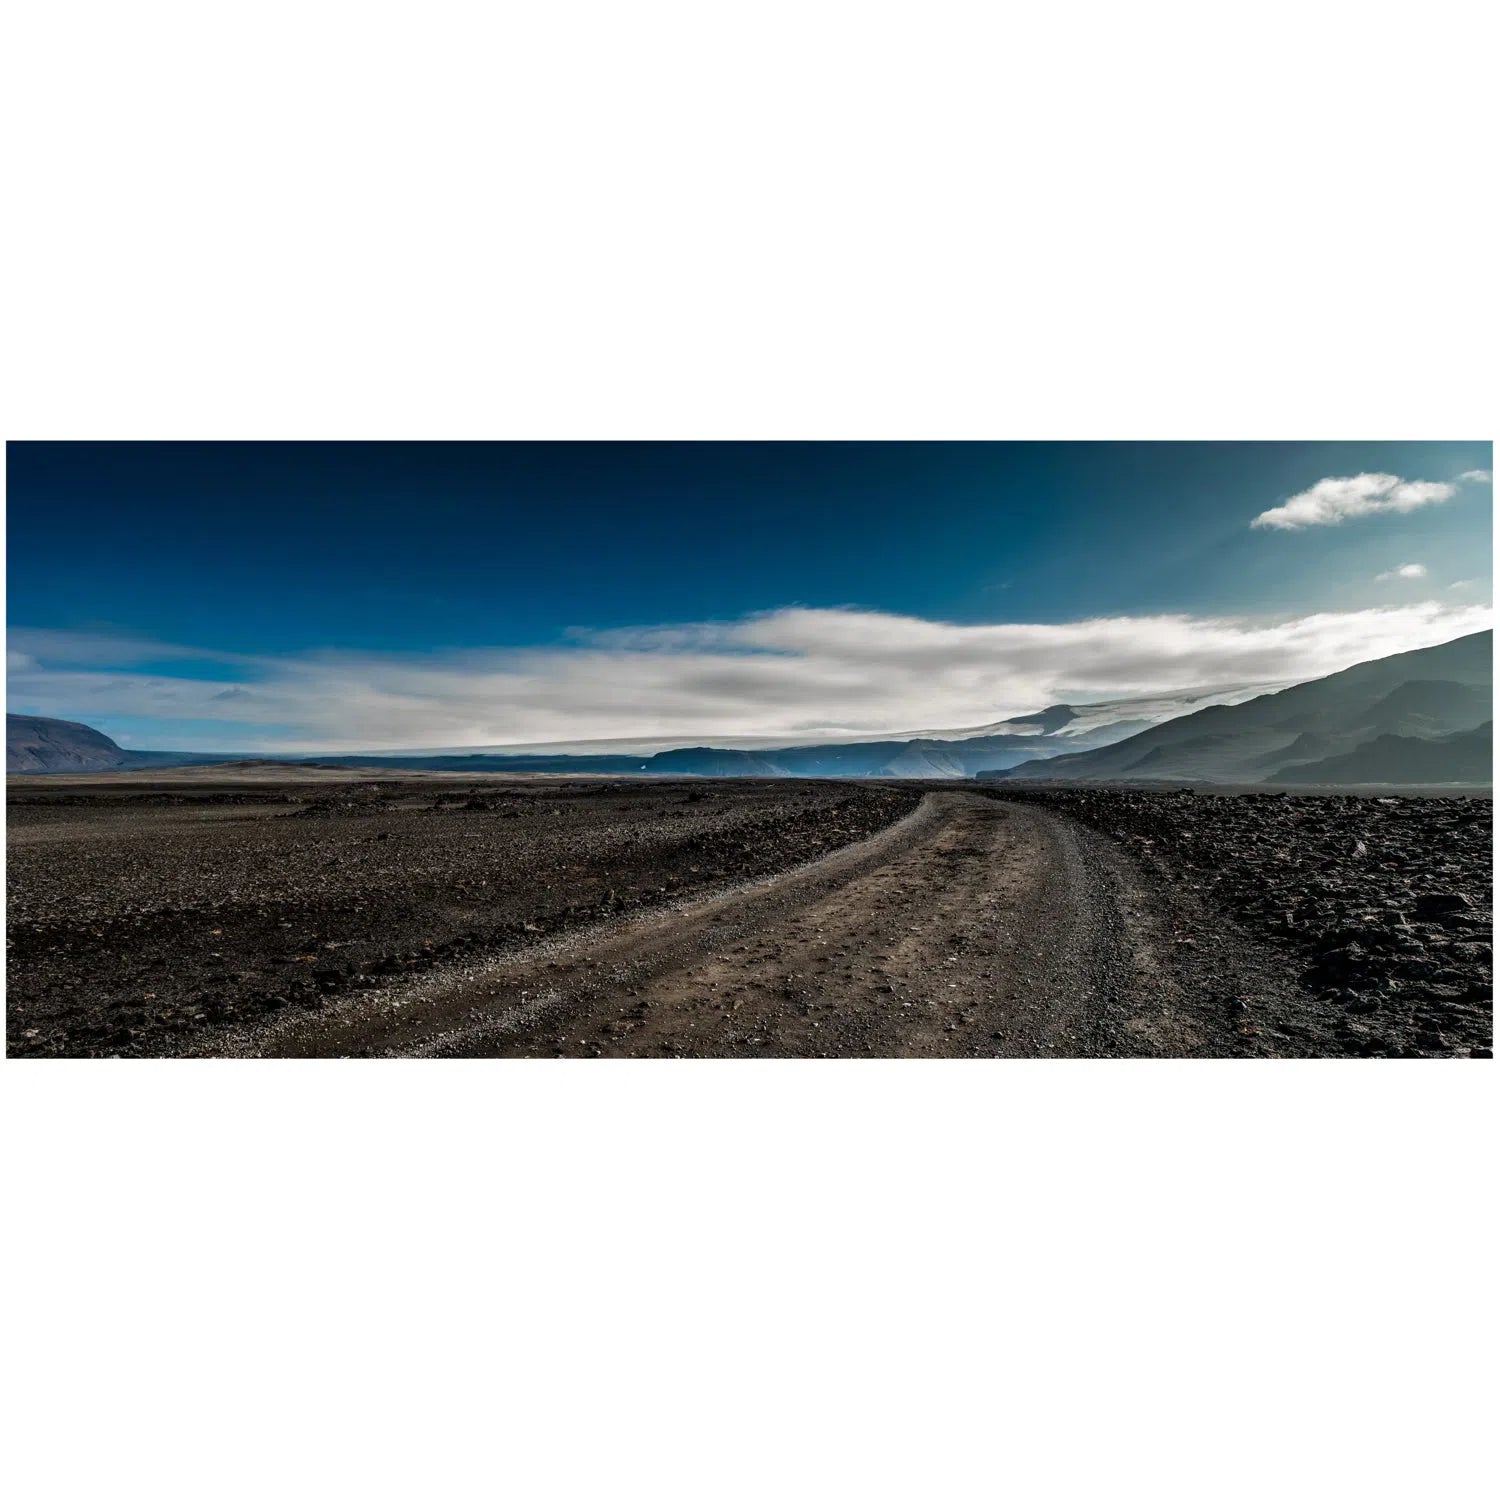 Black road in Iceland-Imagesdartistes